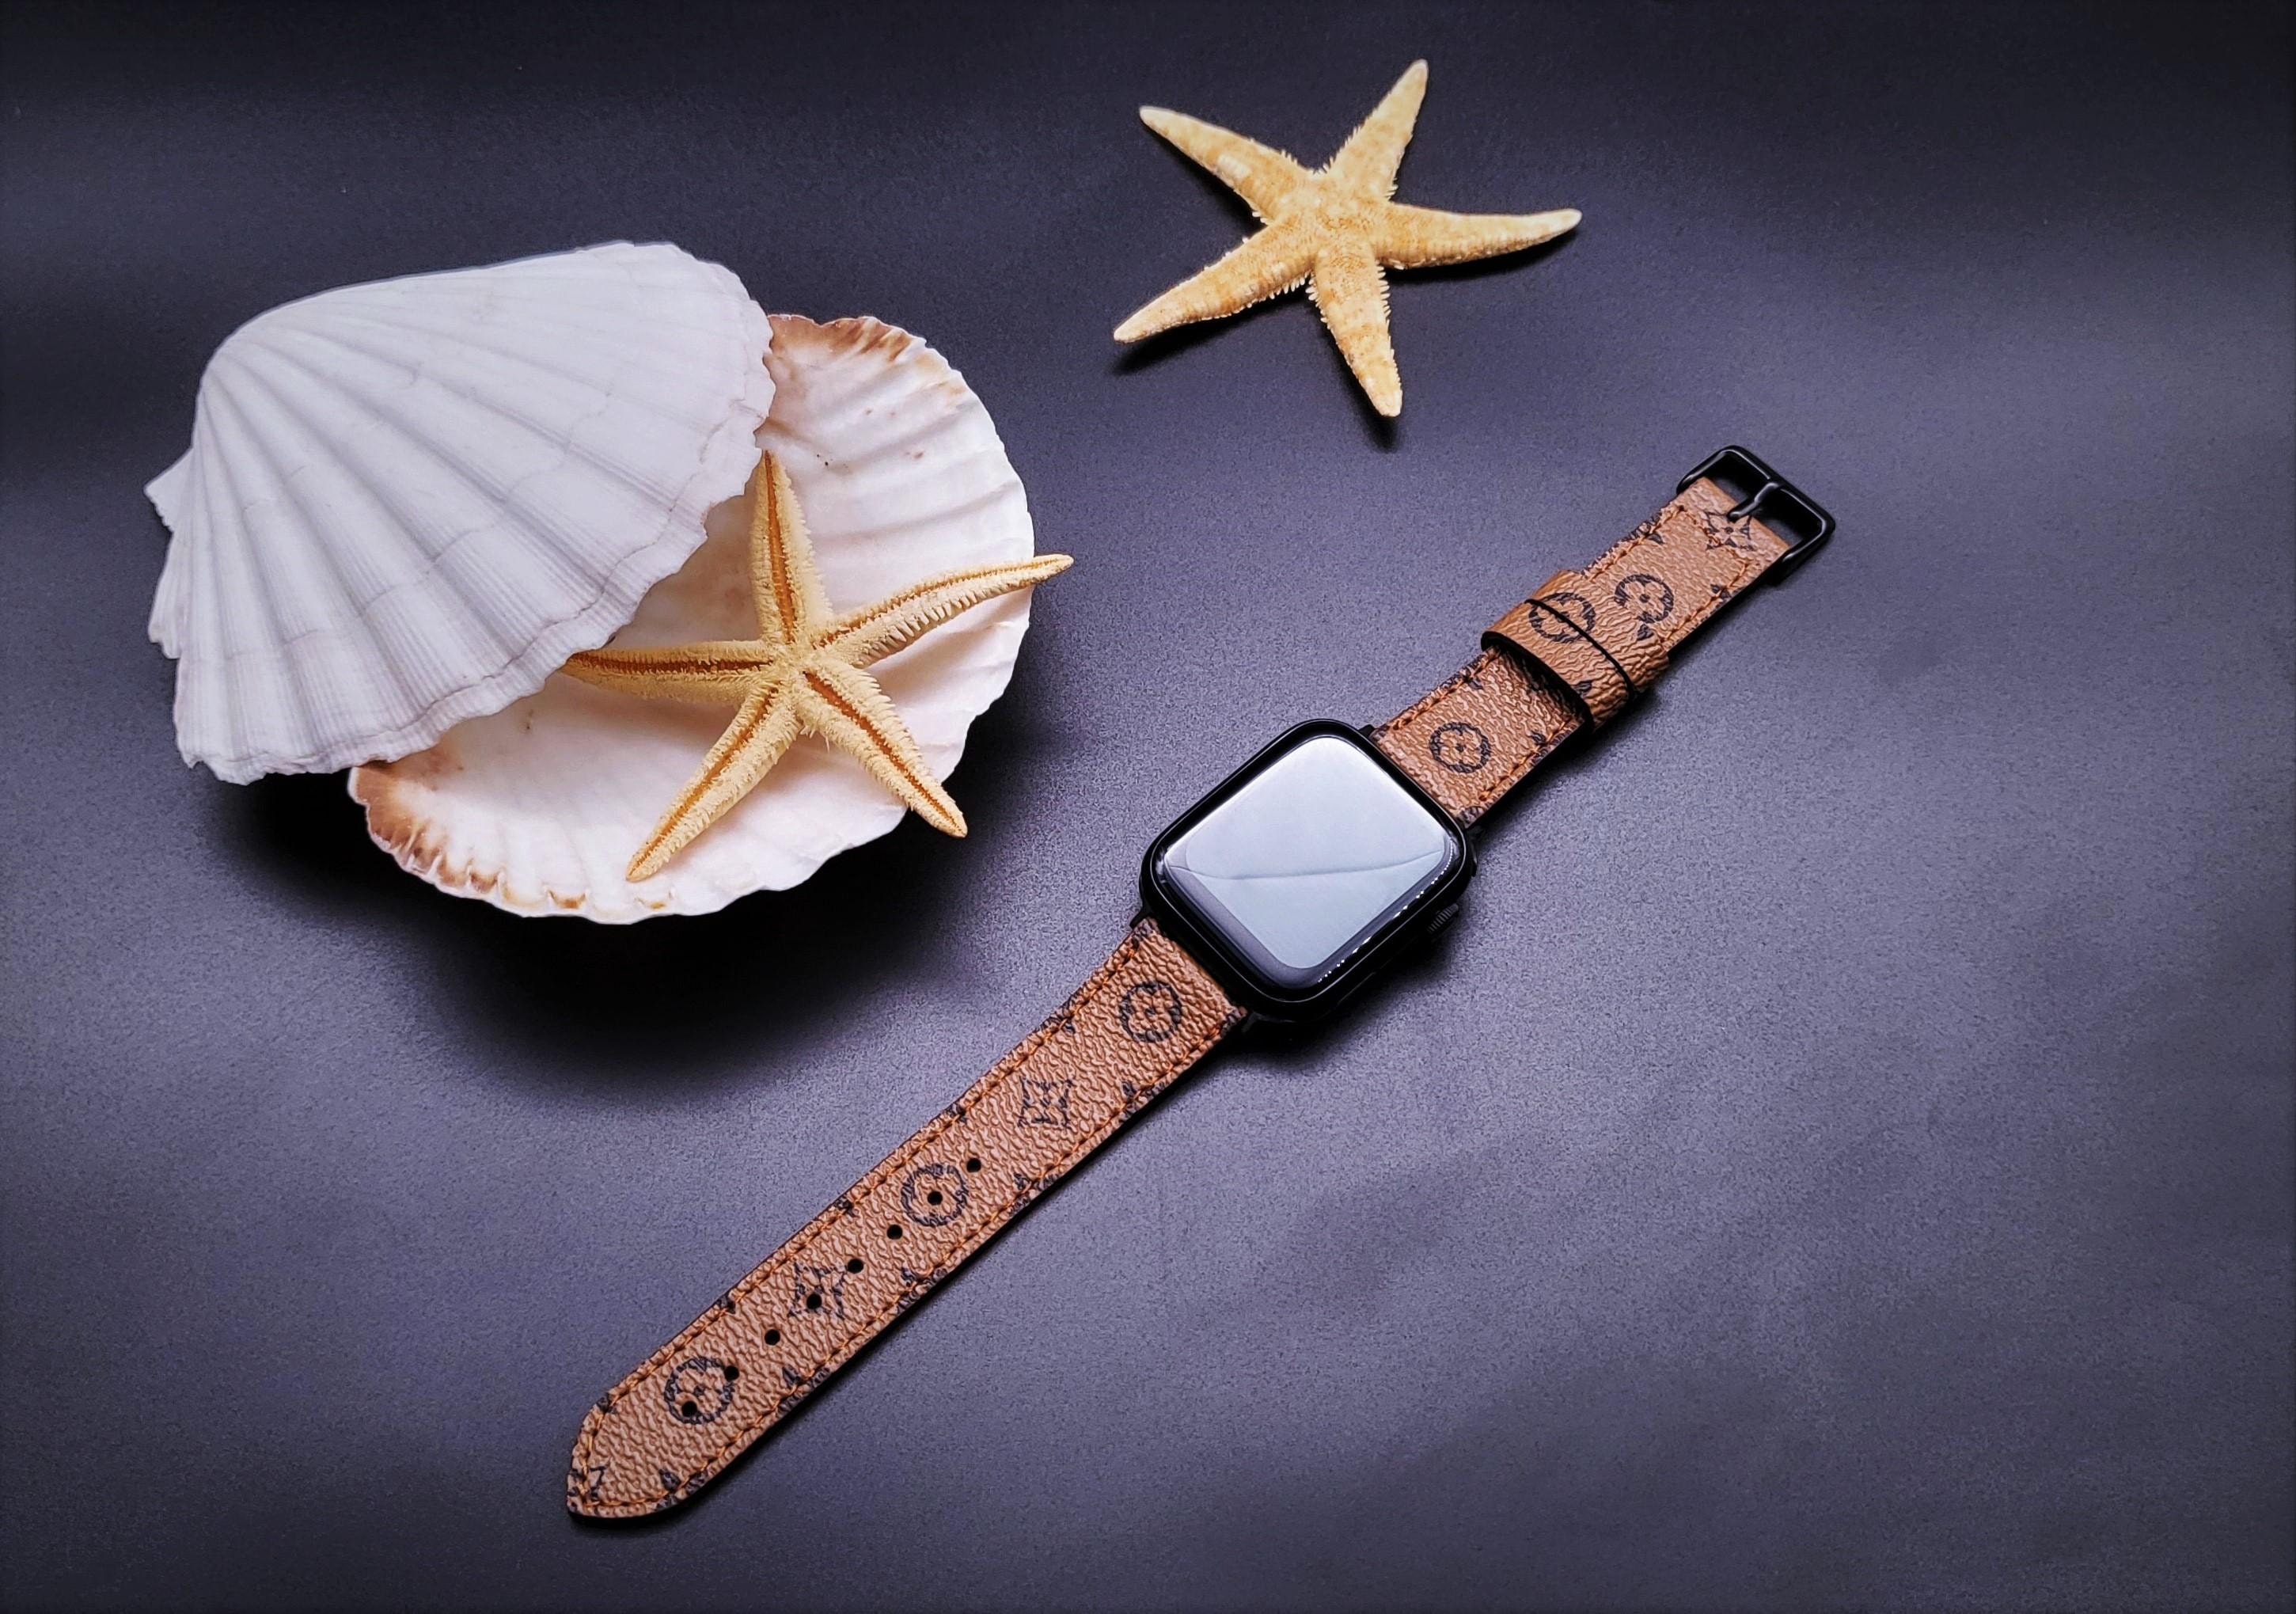 Handmade Louis Vuitton Apple Watch Band The total band length is 146mm to  190mm (5 3/4 to 7 1/2), plus the watc…